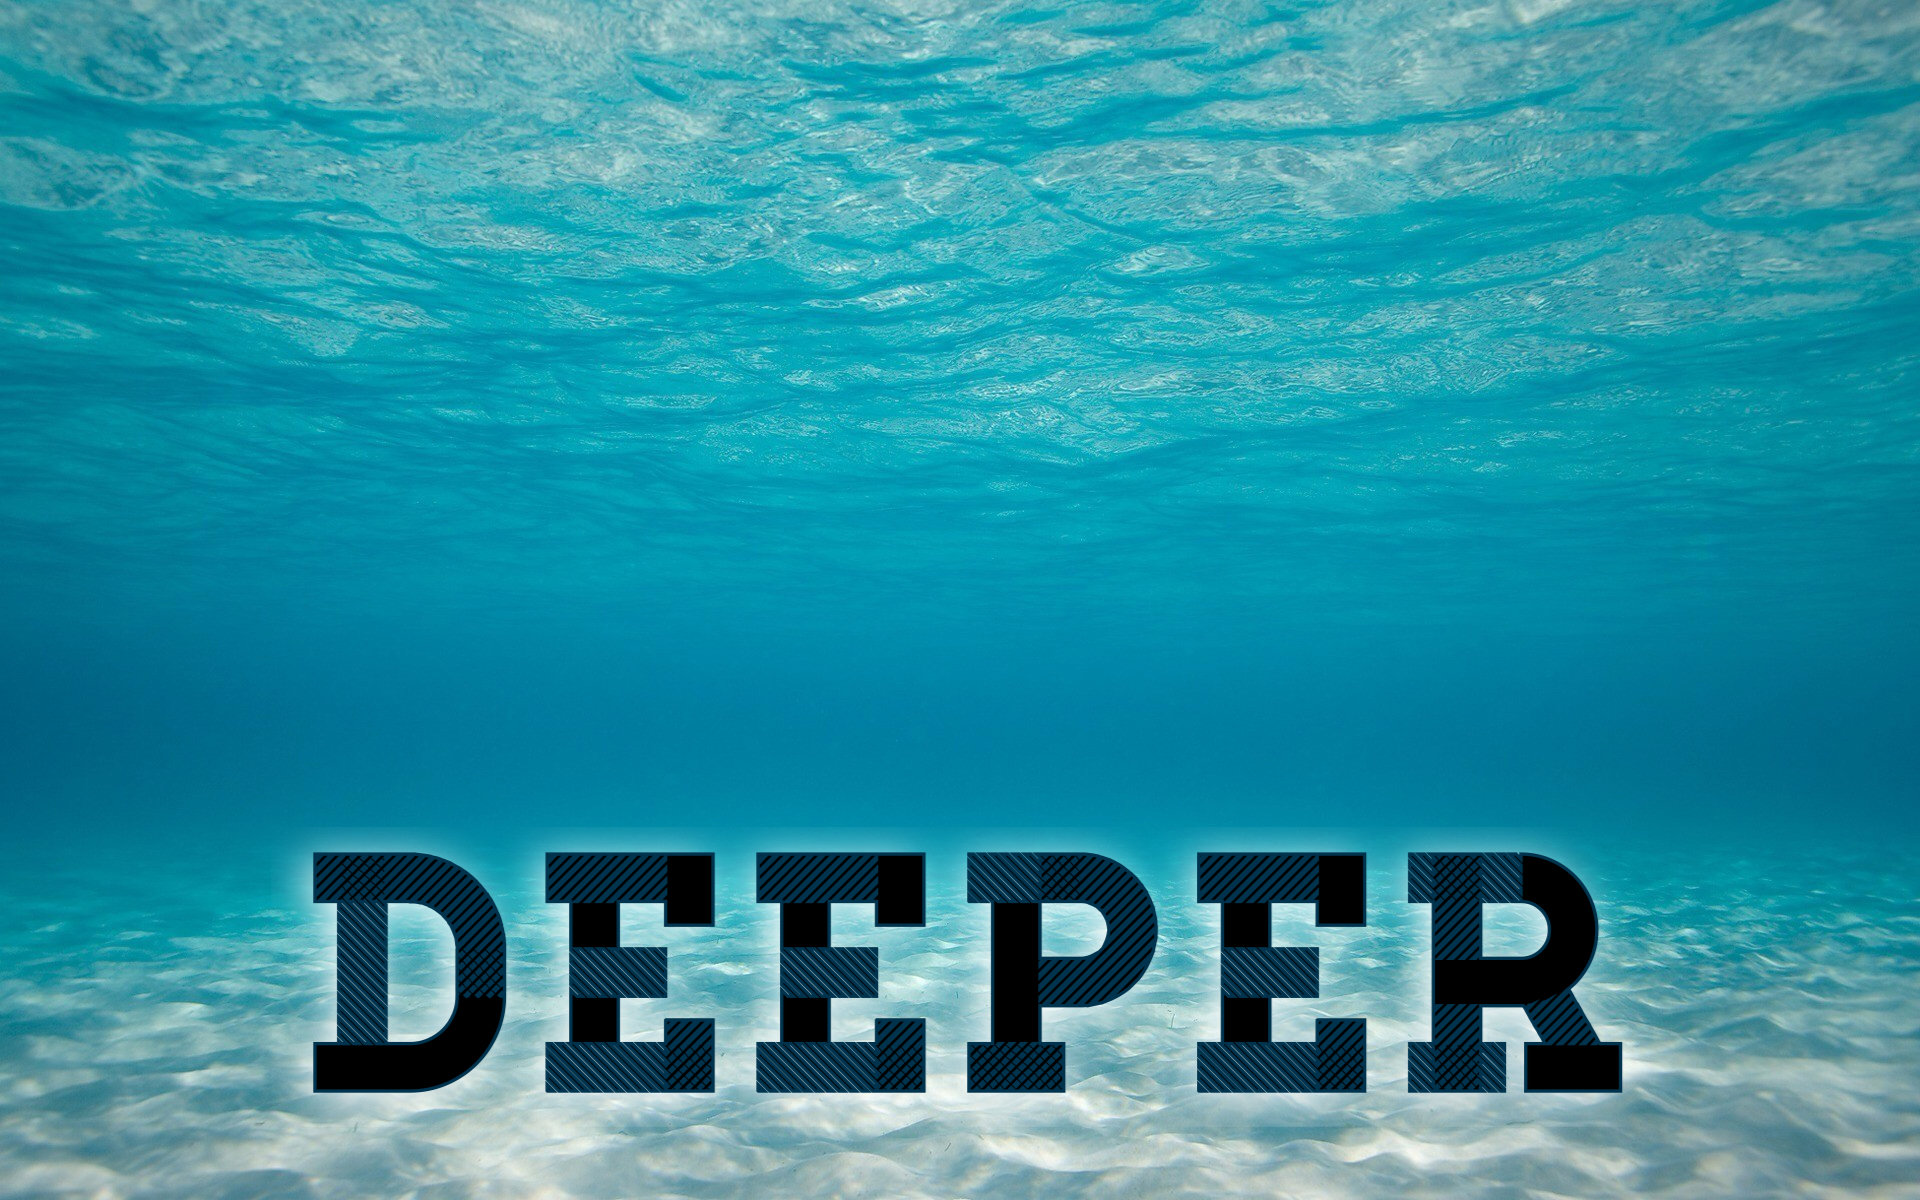 Deeper than a submarine!  Andy & Joy - Life after Lockdown